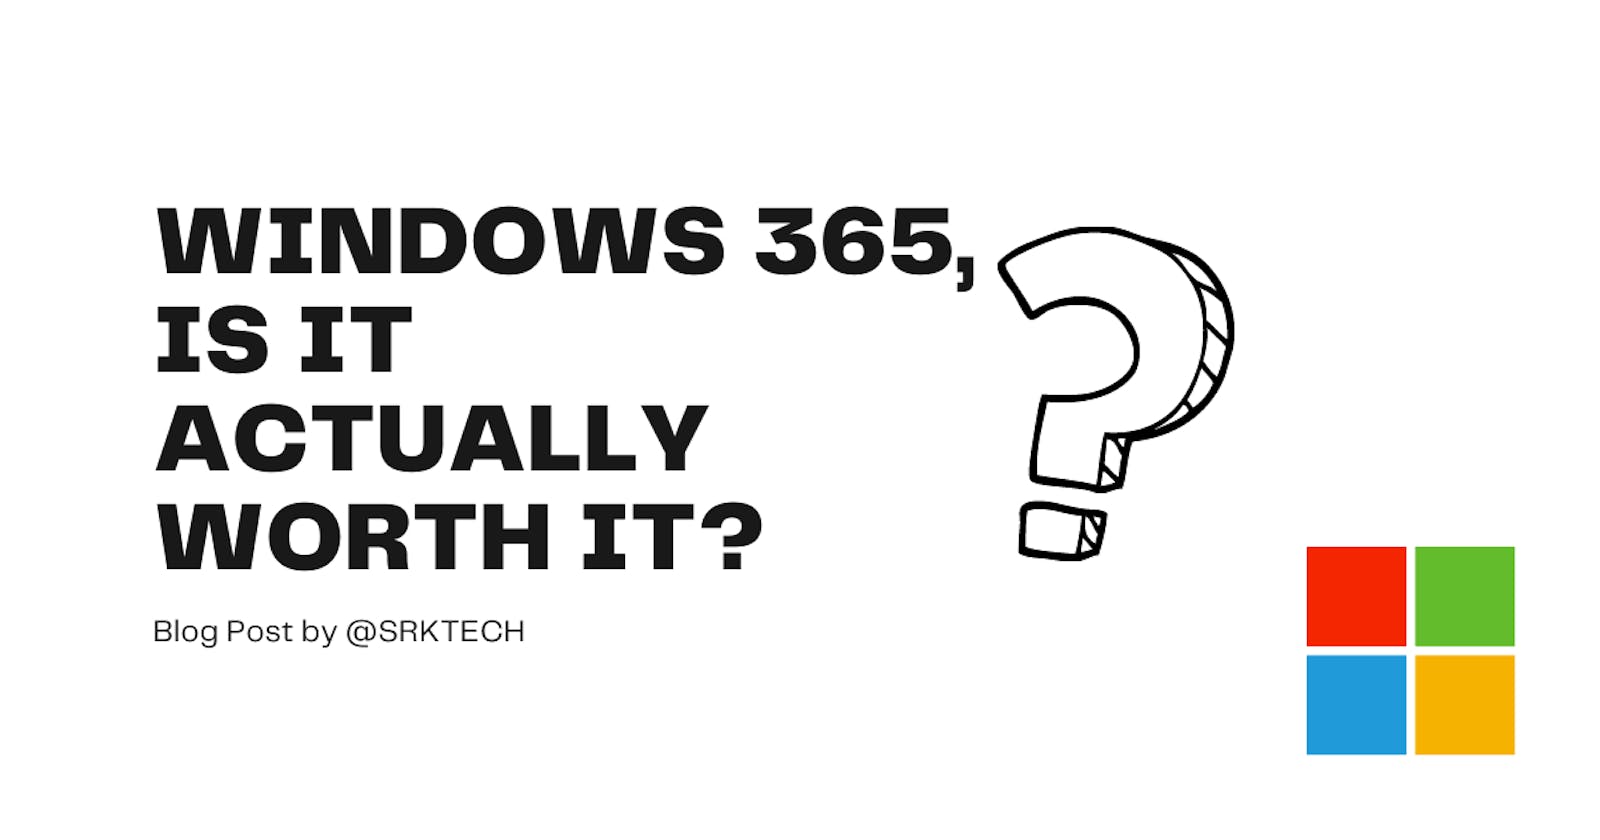 Windows 365, is it actually worth it?